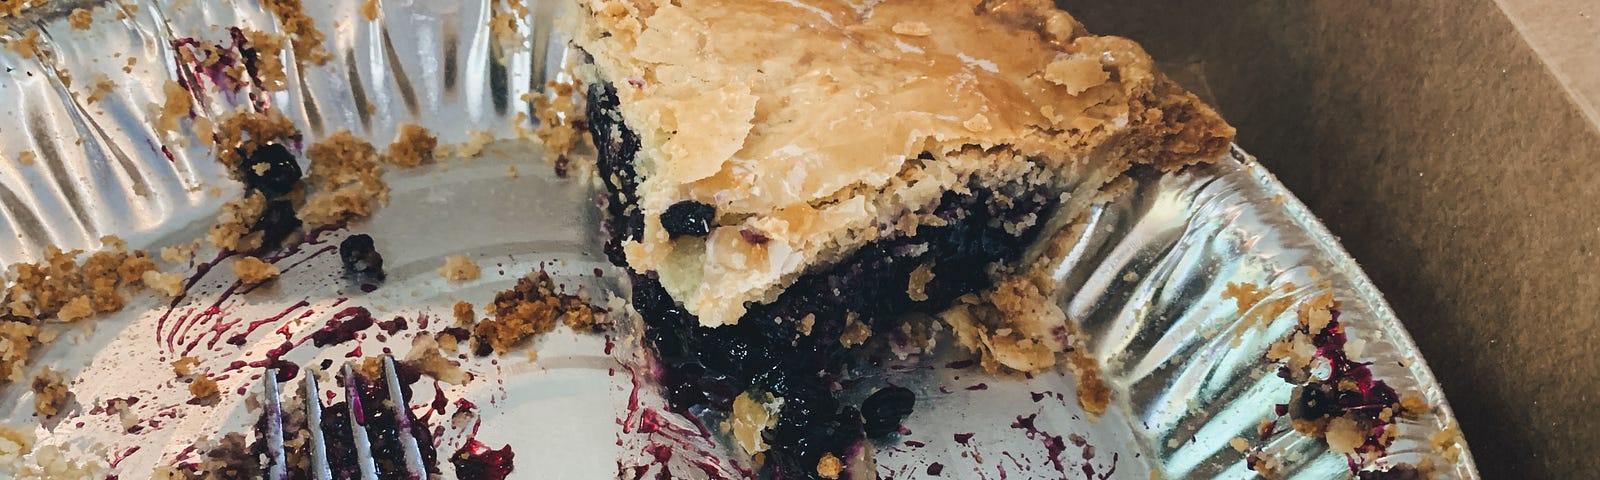 aluminum pie pan with one slice of blueberry pie remaining along with a dirty fork